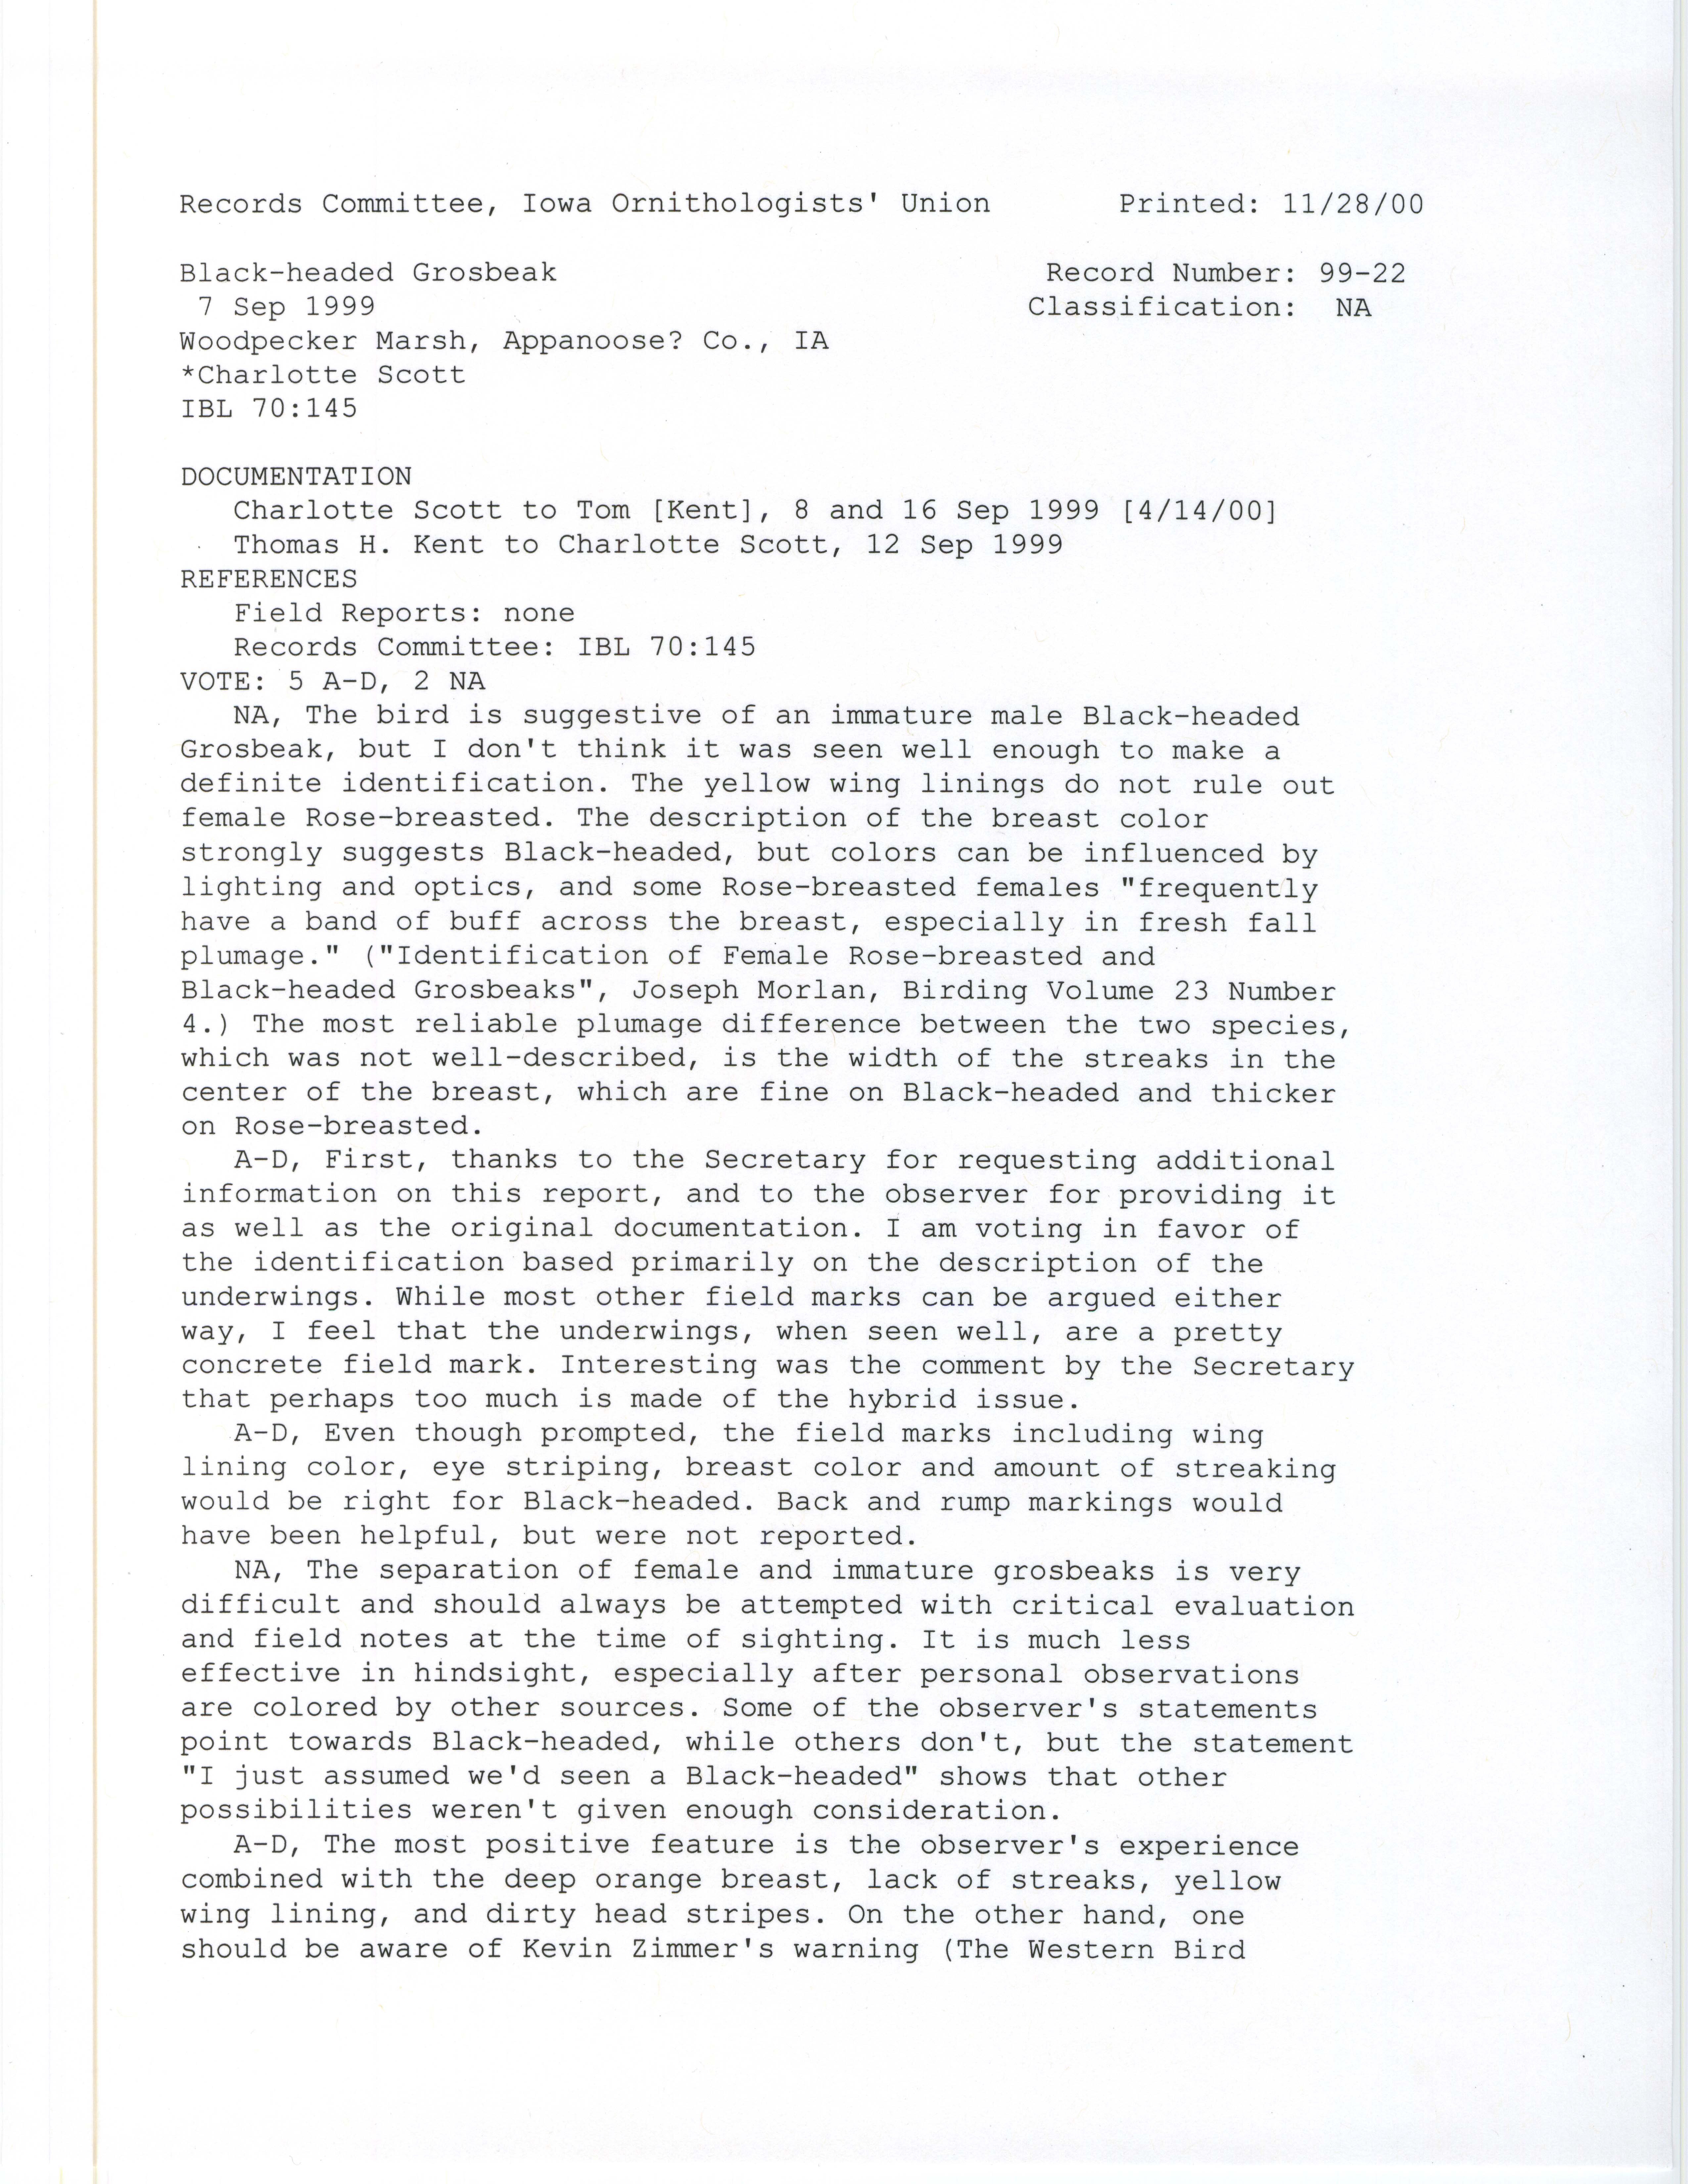 Records Committee review for rare bird sighting for Black-headed Grosbeak at Woodpecker Marsh, 1999